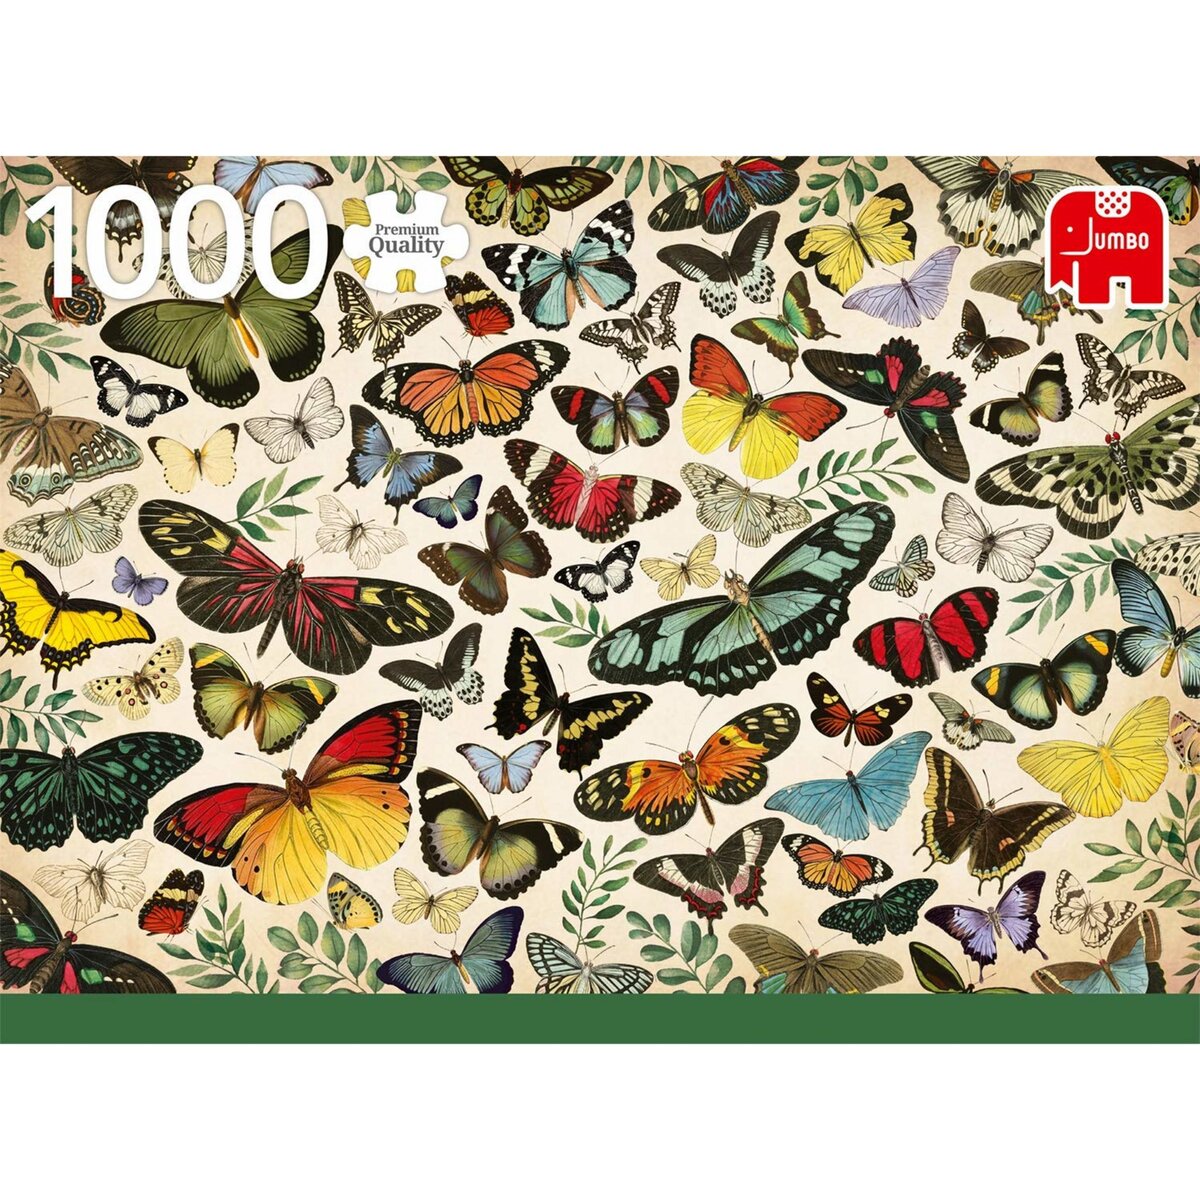 Jumbo Puzzle 1000 pièces : Poster : Papillons